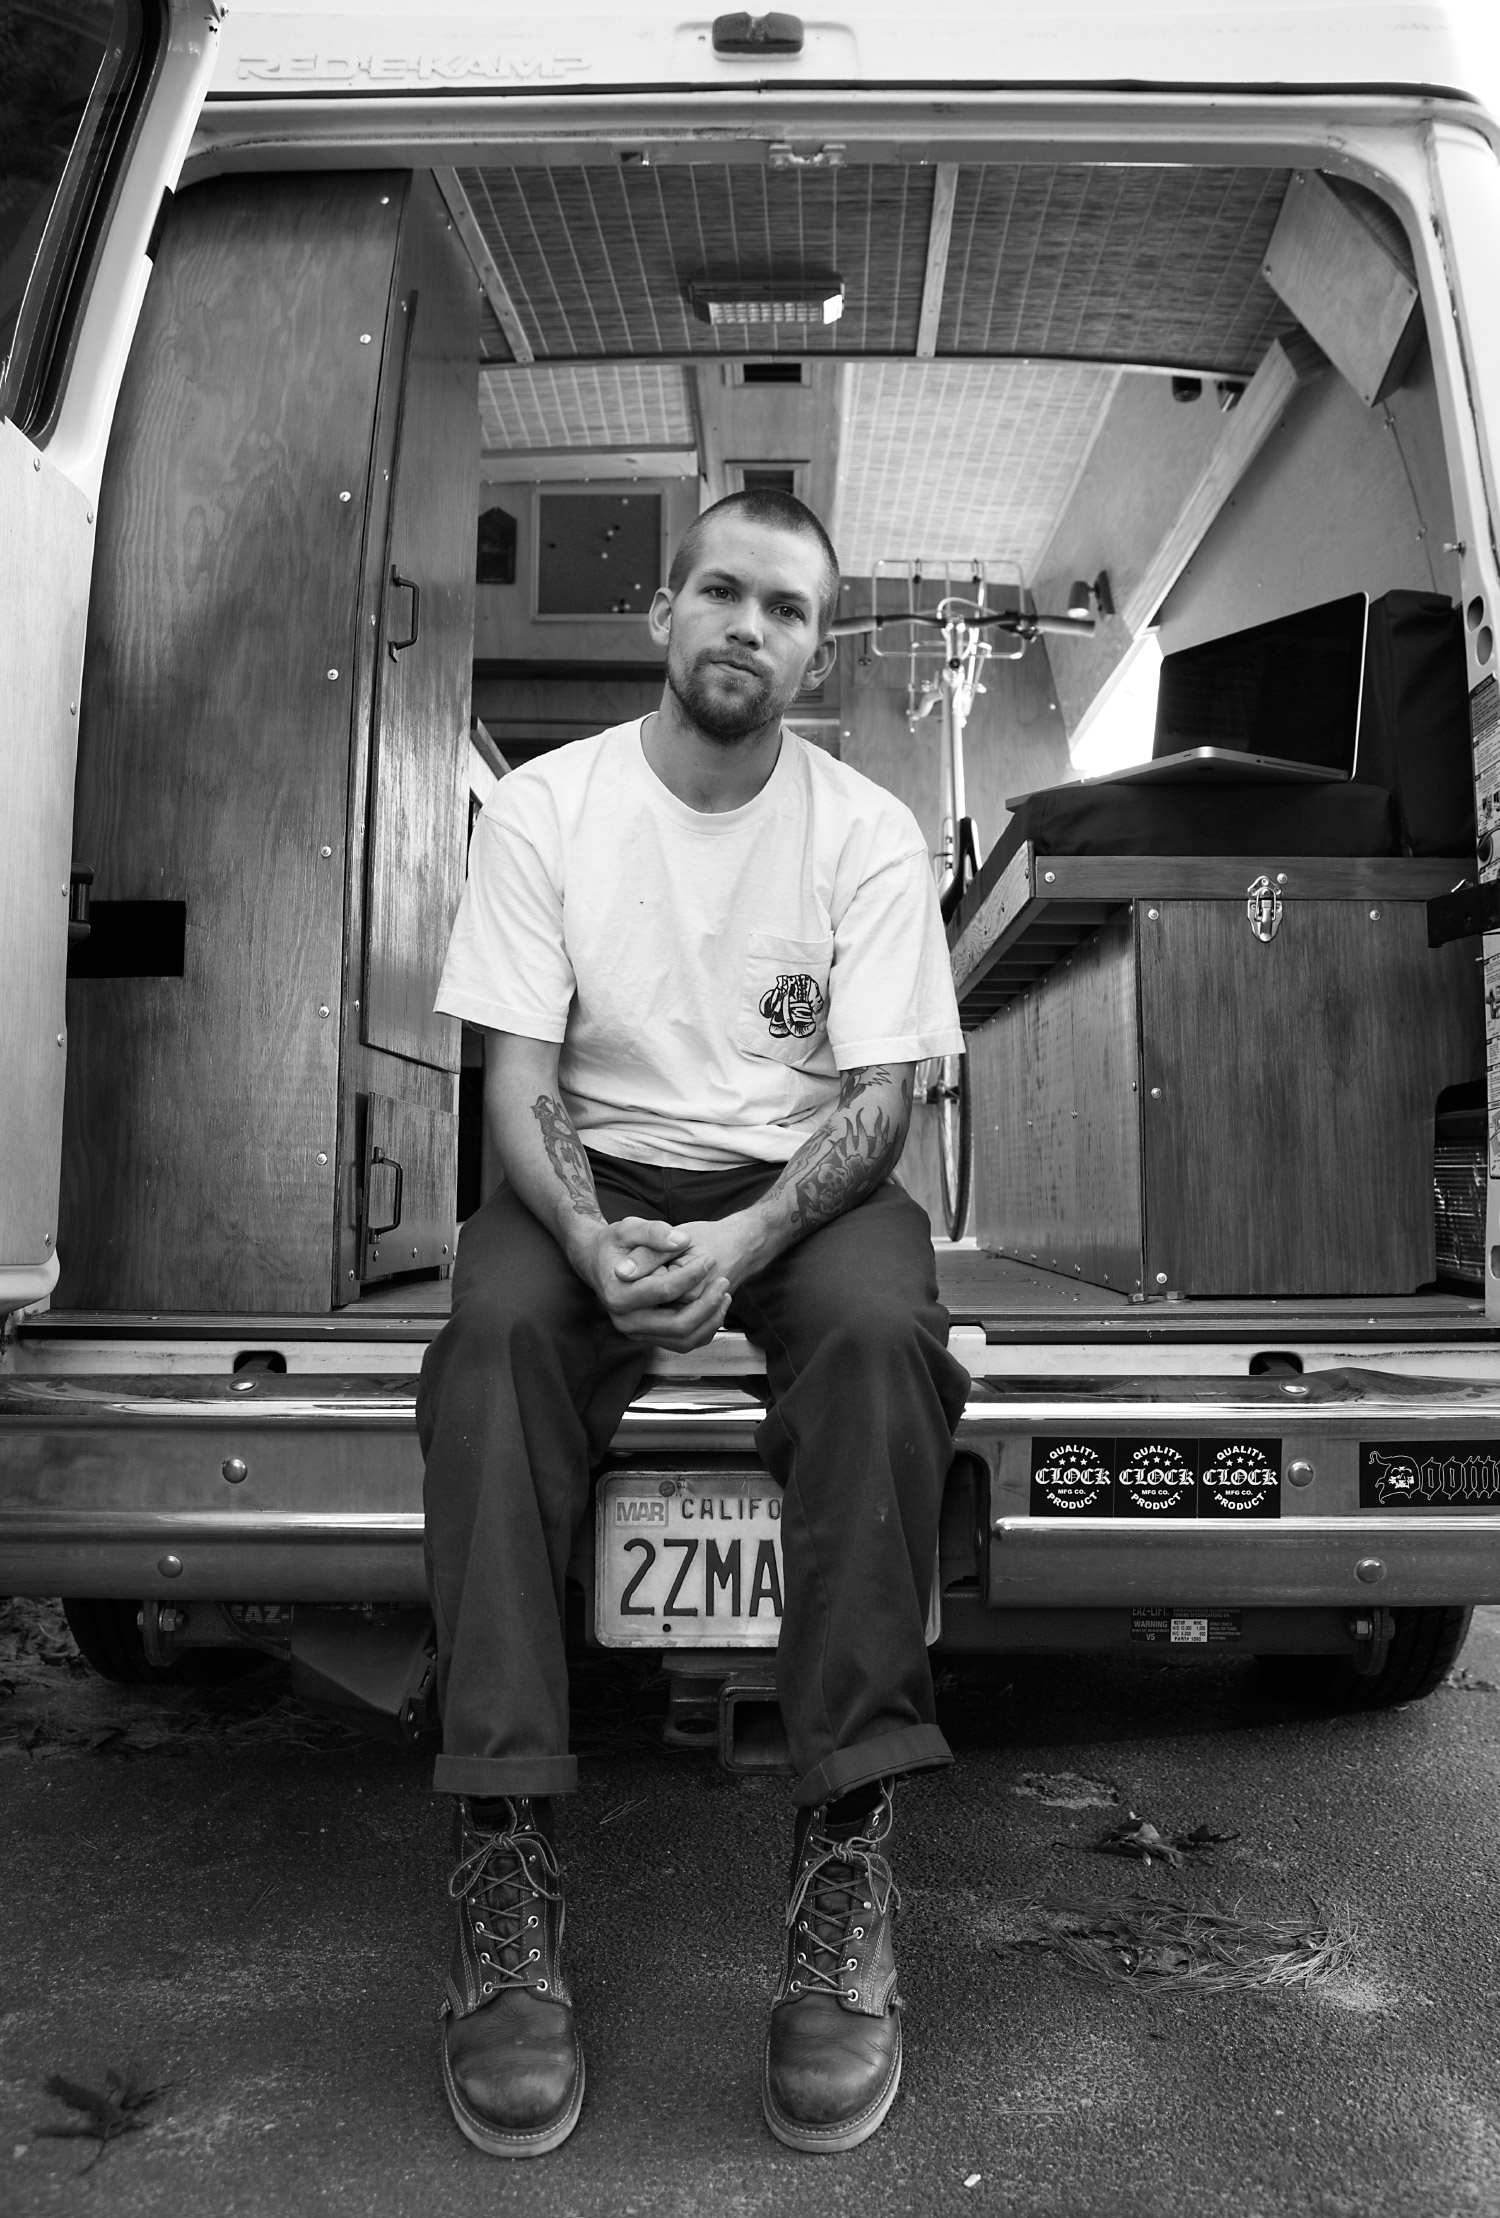  Jeff Hill has spent the past year gutting and rebuilding the interior of his van, making it his home. He has lived out of it in San Francisco for a year, traveling back and forth from California to&nbsp;Massachusetts. Check out his site&nbsp;  hillt